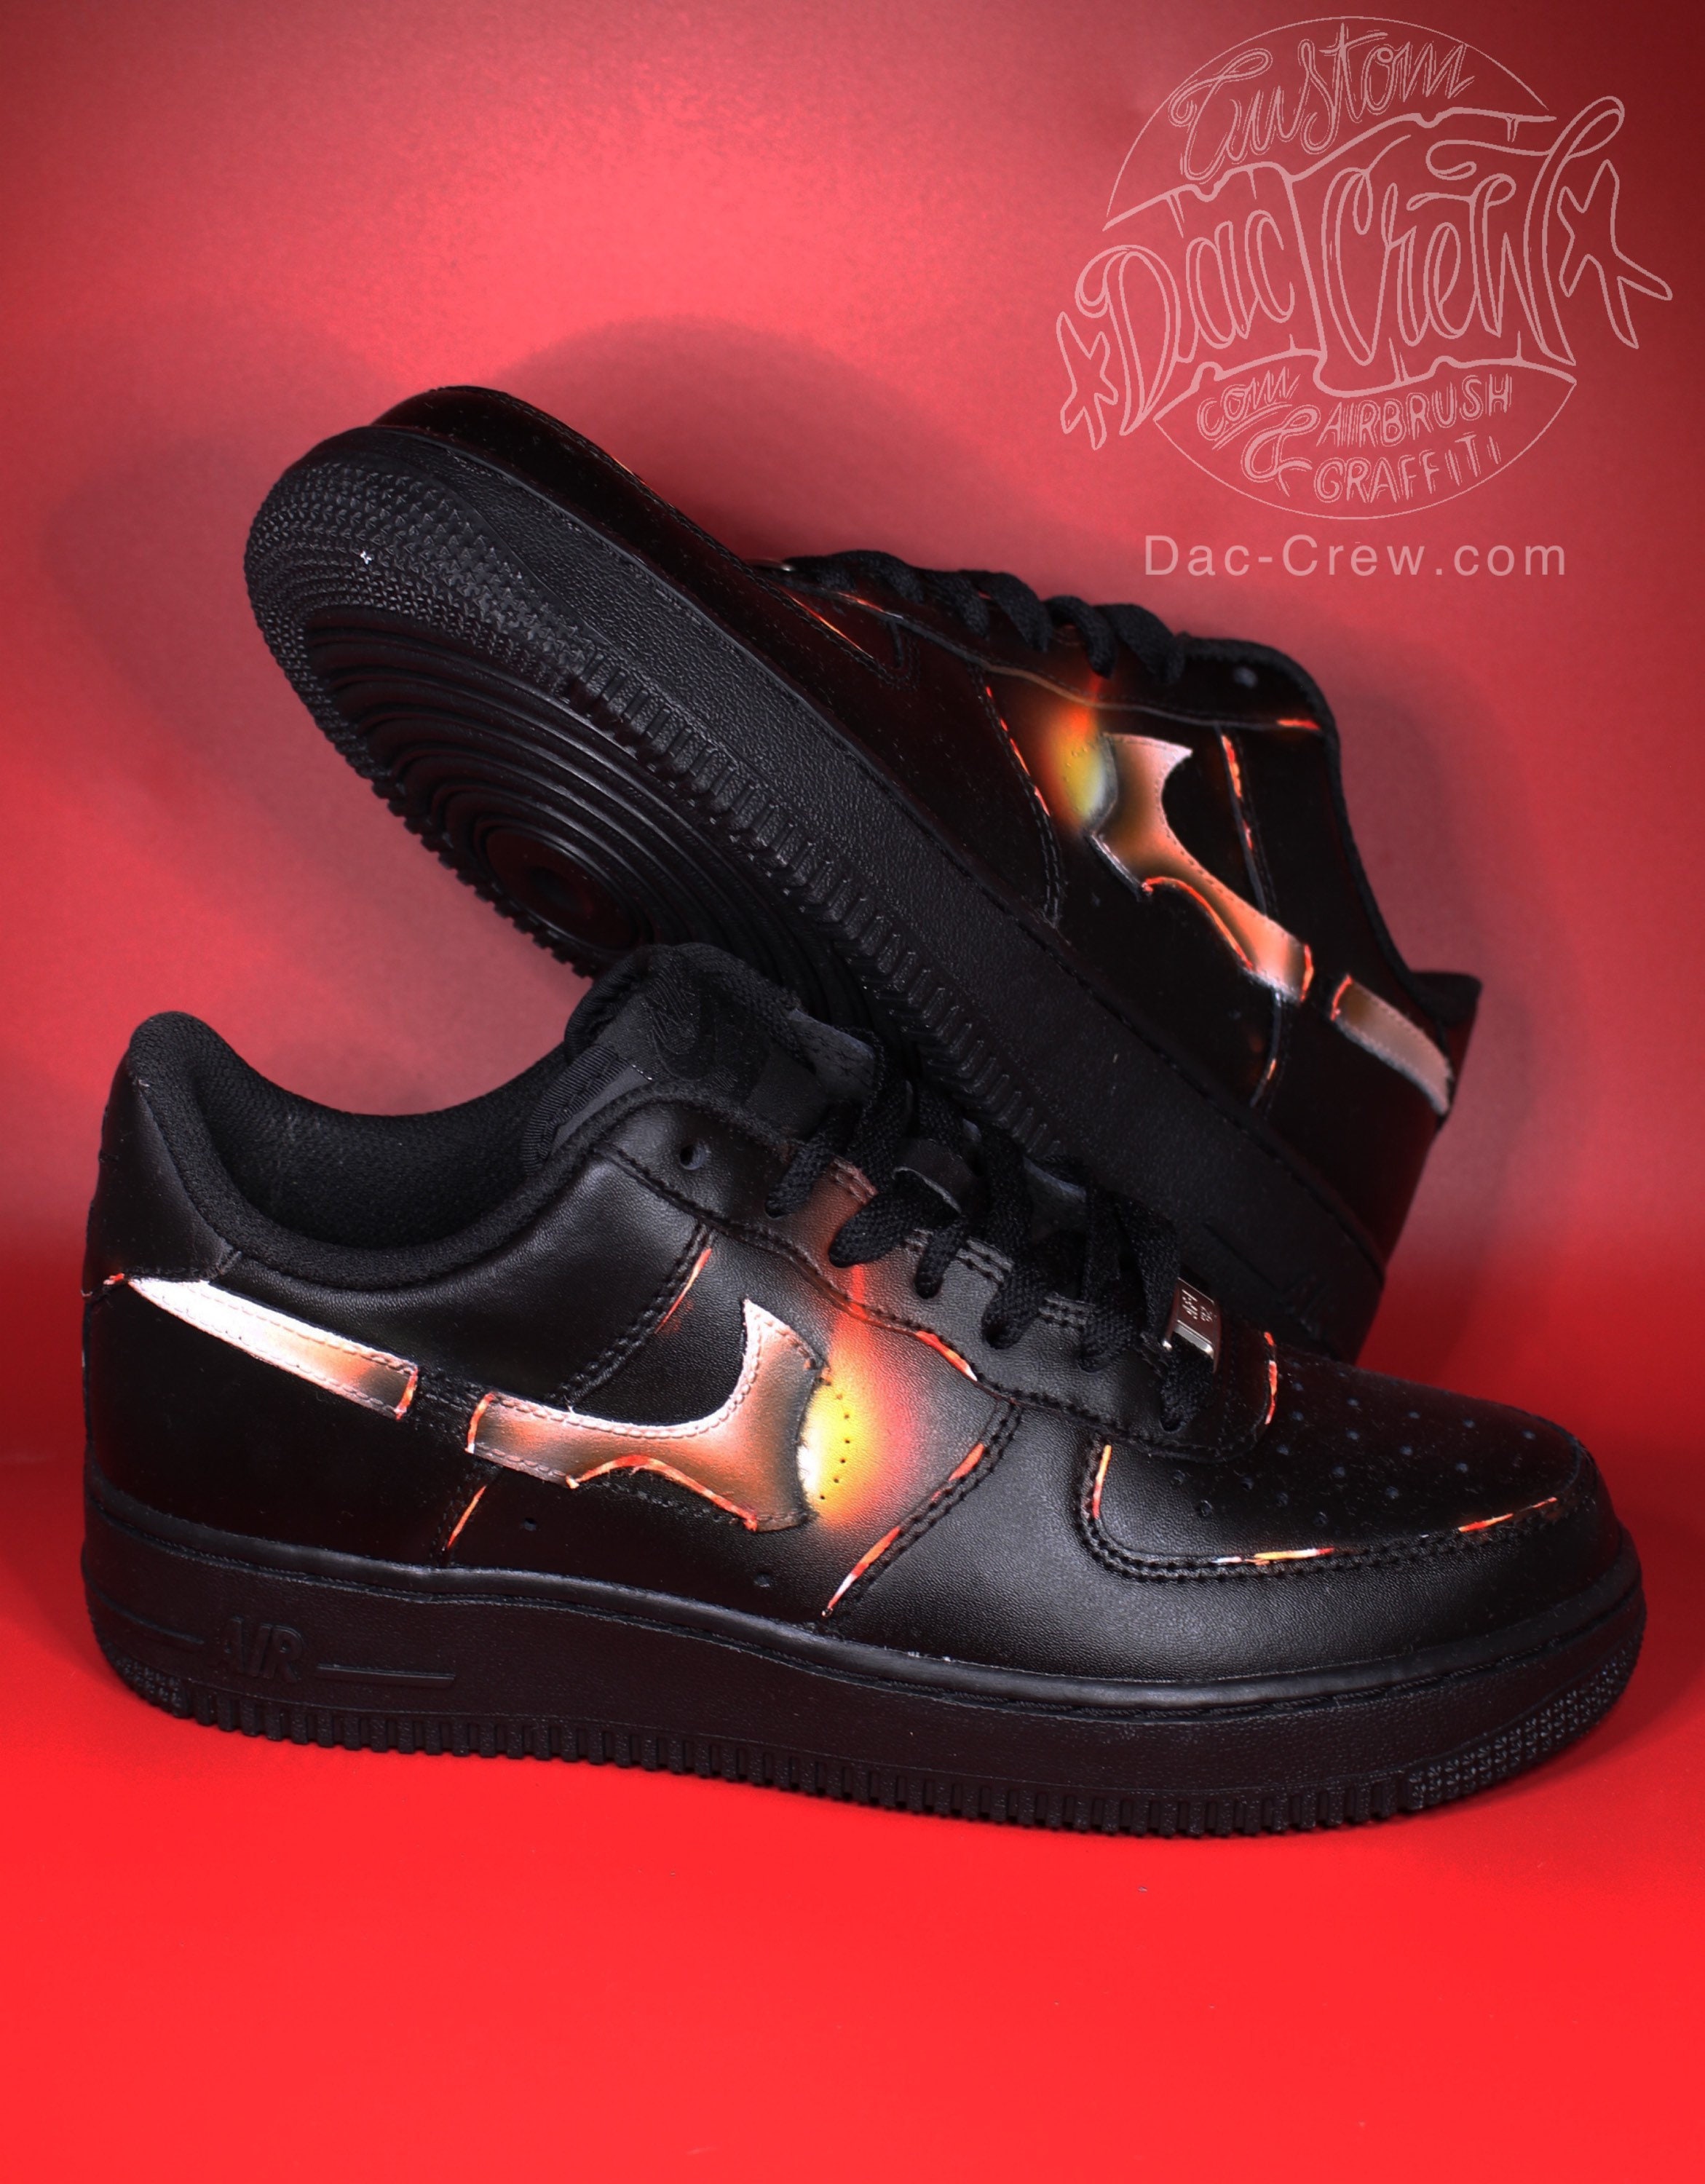 Nike Af1 Air Force 1 Custom - Reflective Flames - All Sizes - Unisex - Sneaker Lightning Thunder Shoes